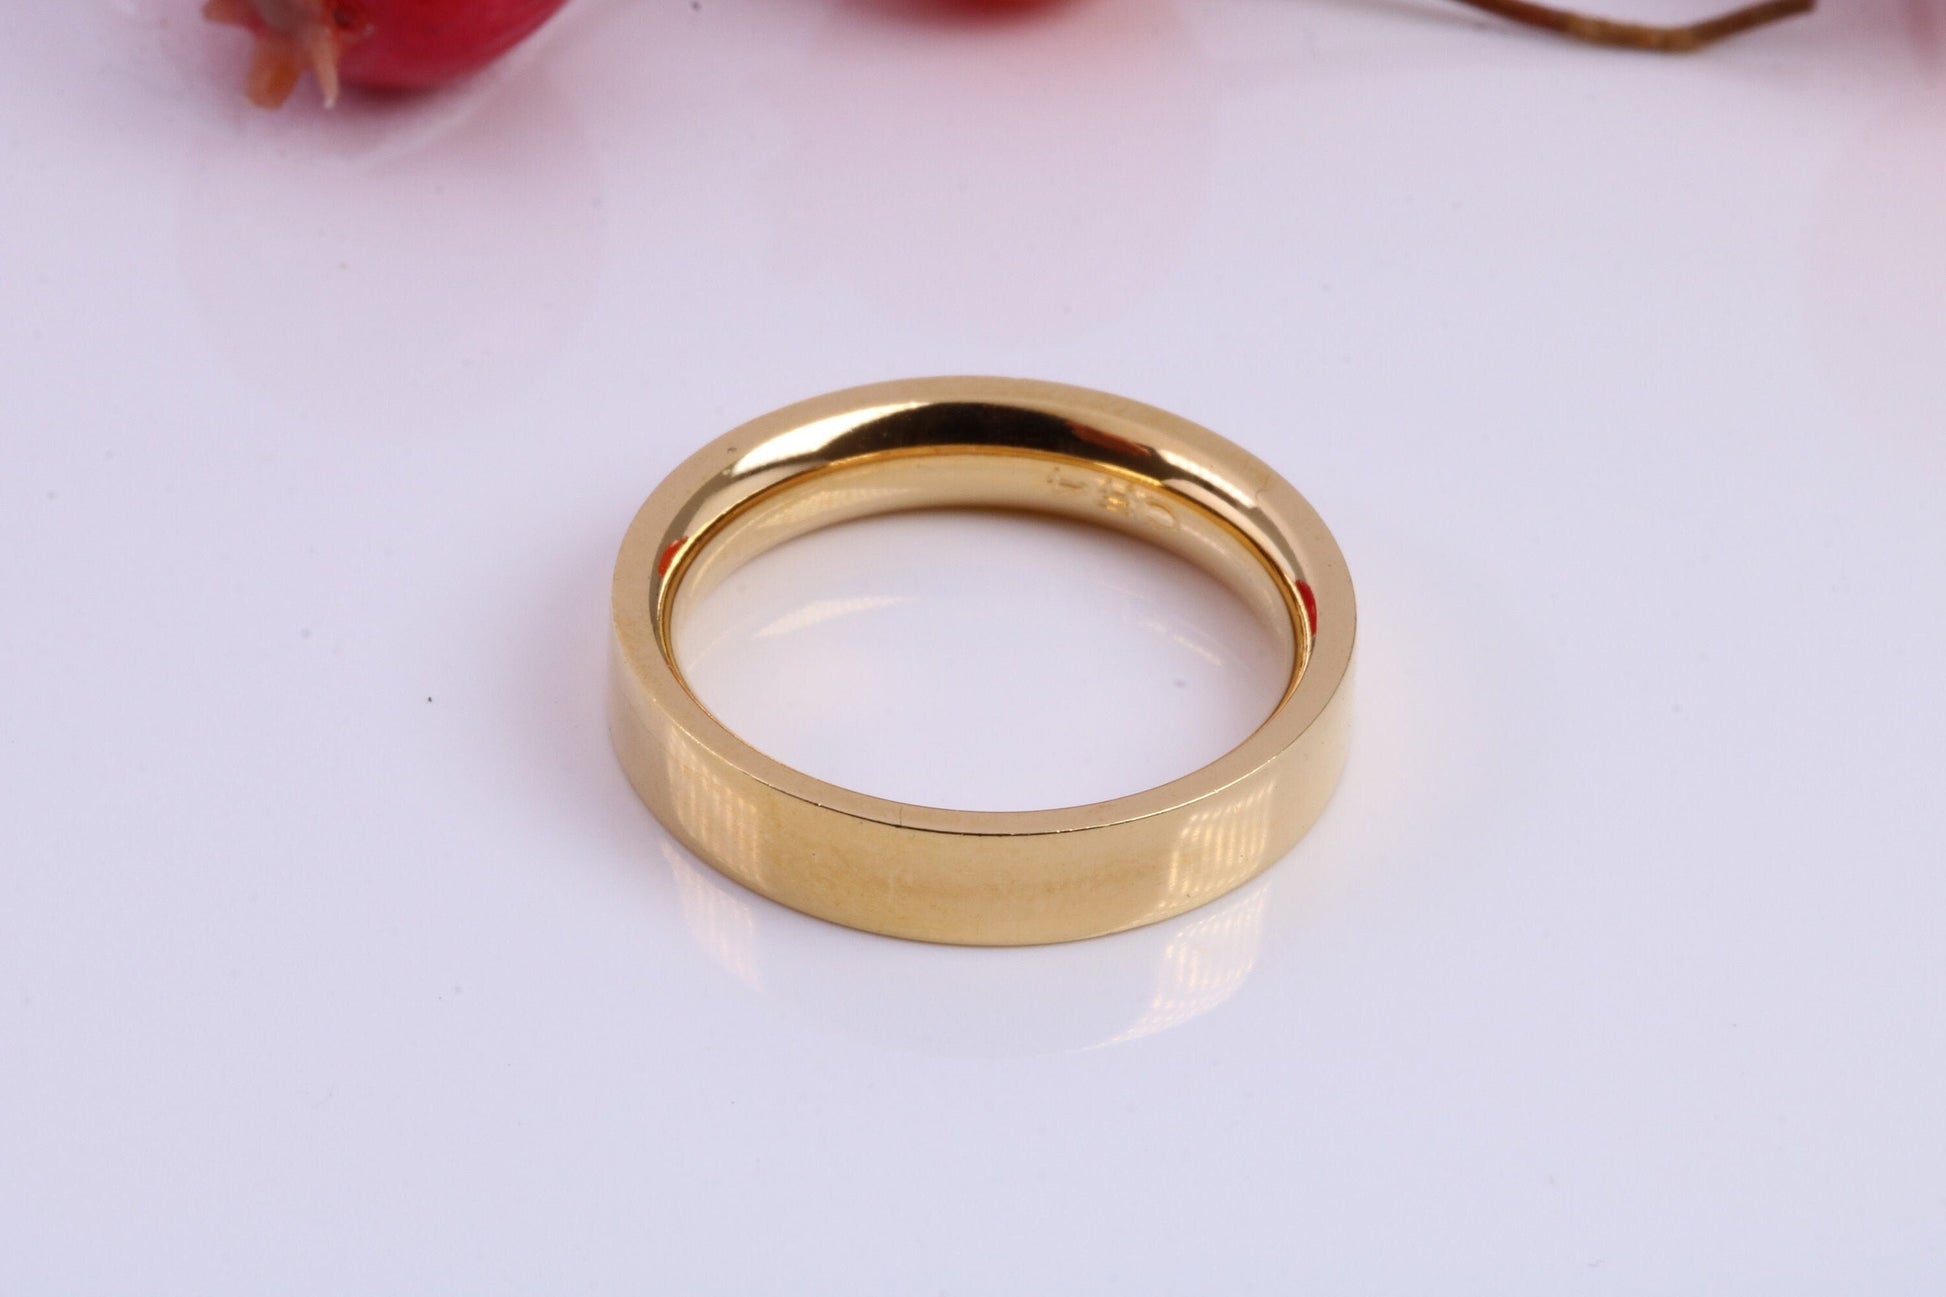 5 mm wide Simple Band, Flat Profile, Made from Solid Silver and Further 18ct Yellow Gold Plated